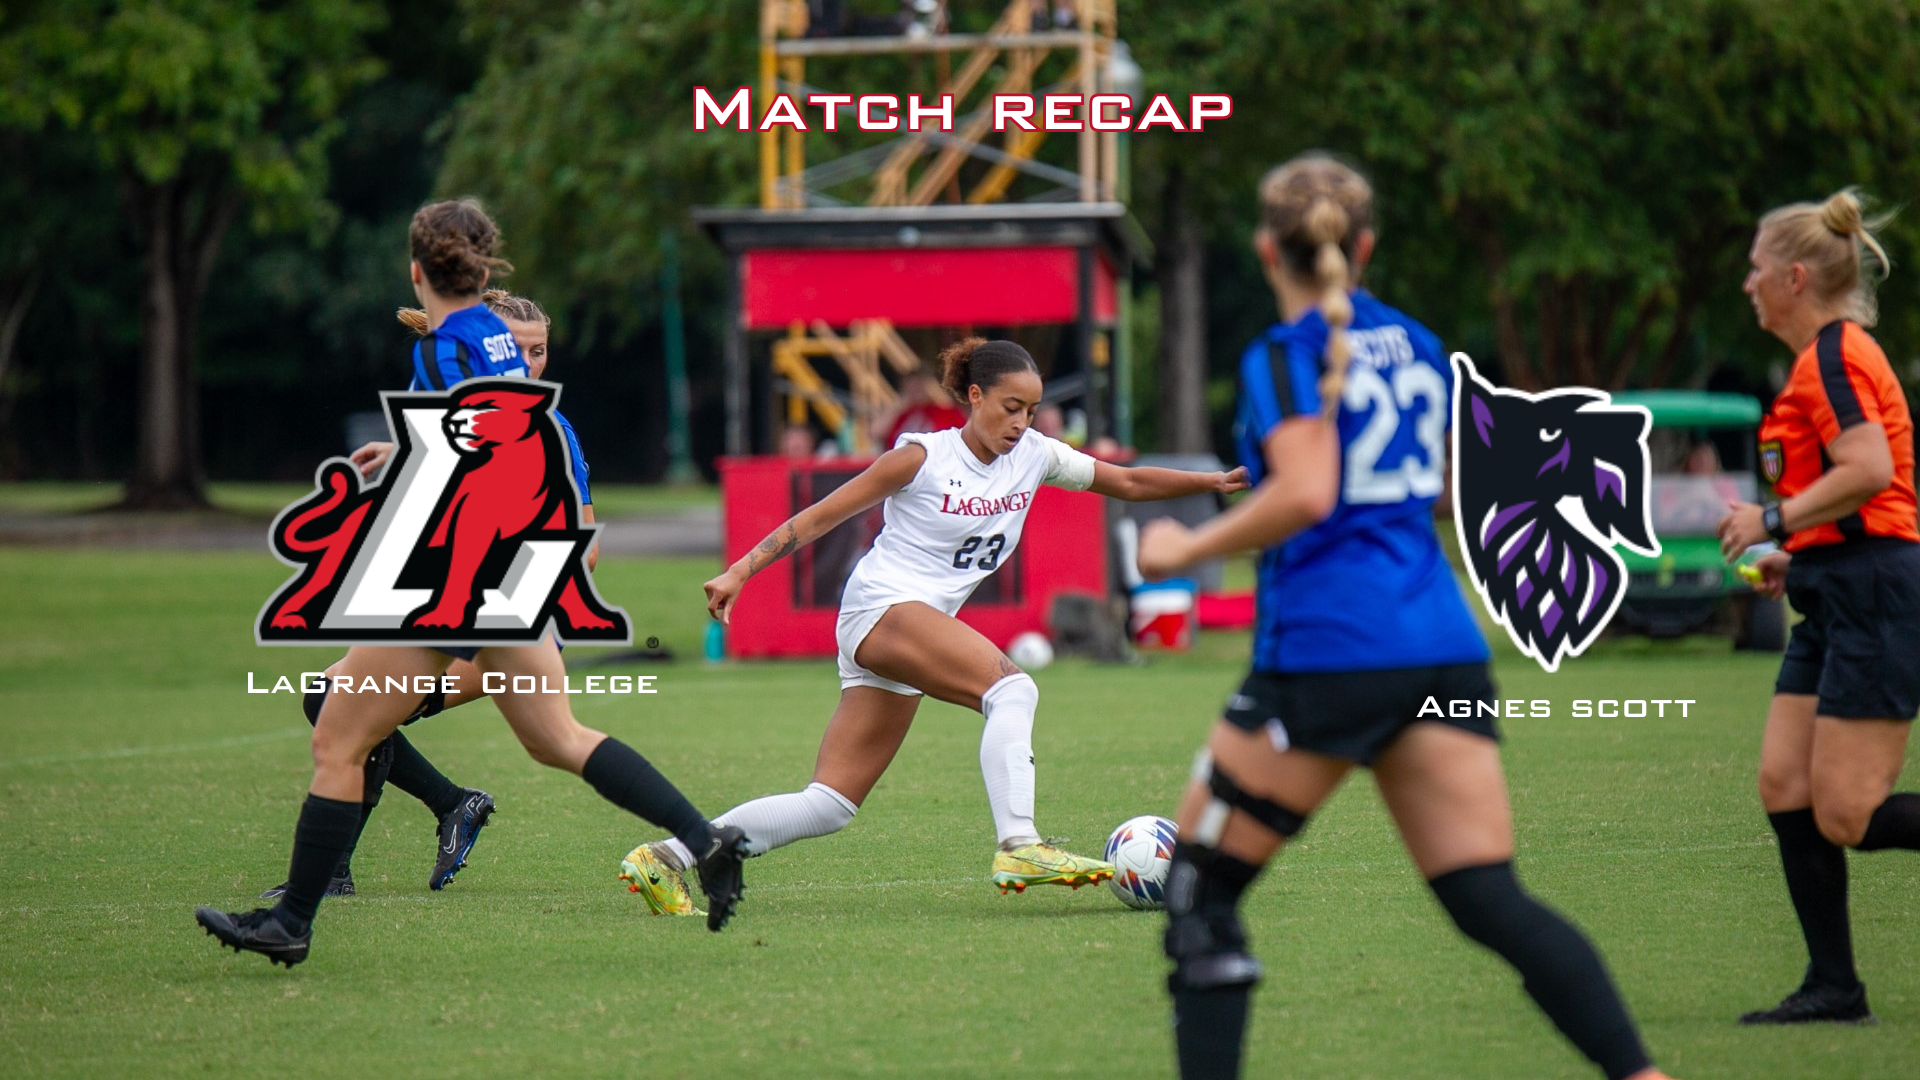 An outstanding second half puts the Panthers past Agnes Scott 3-0